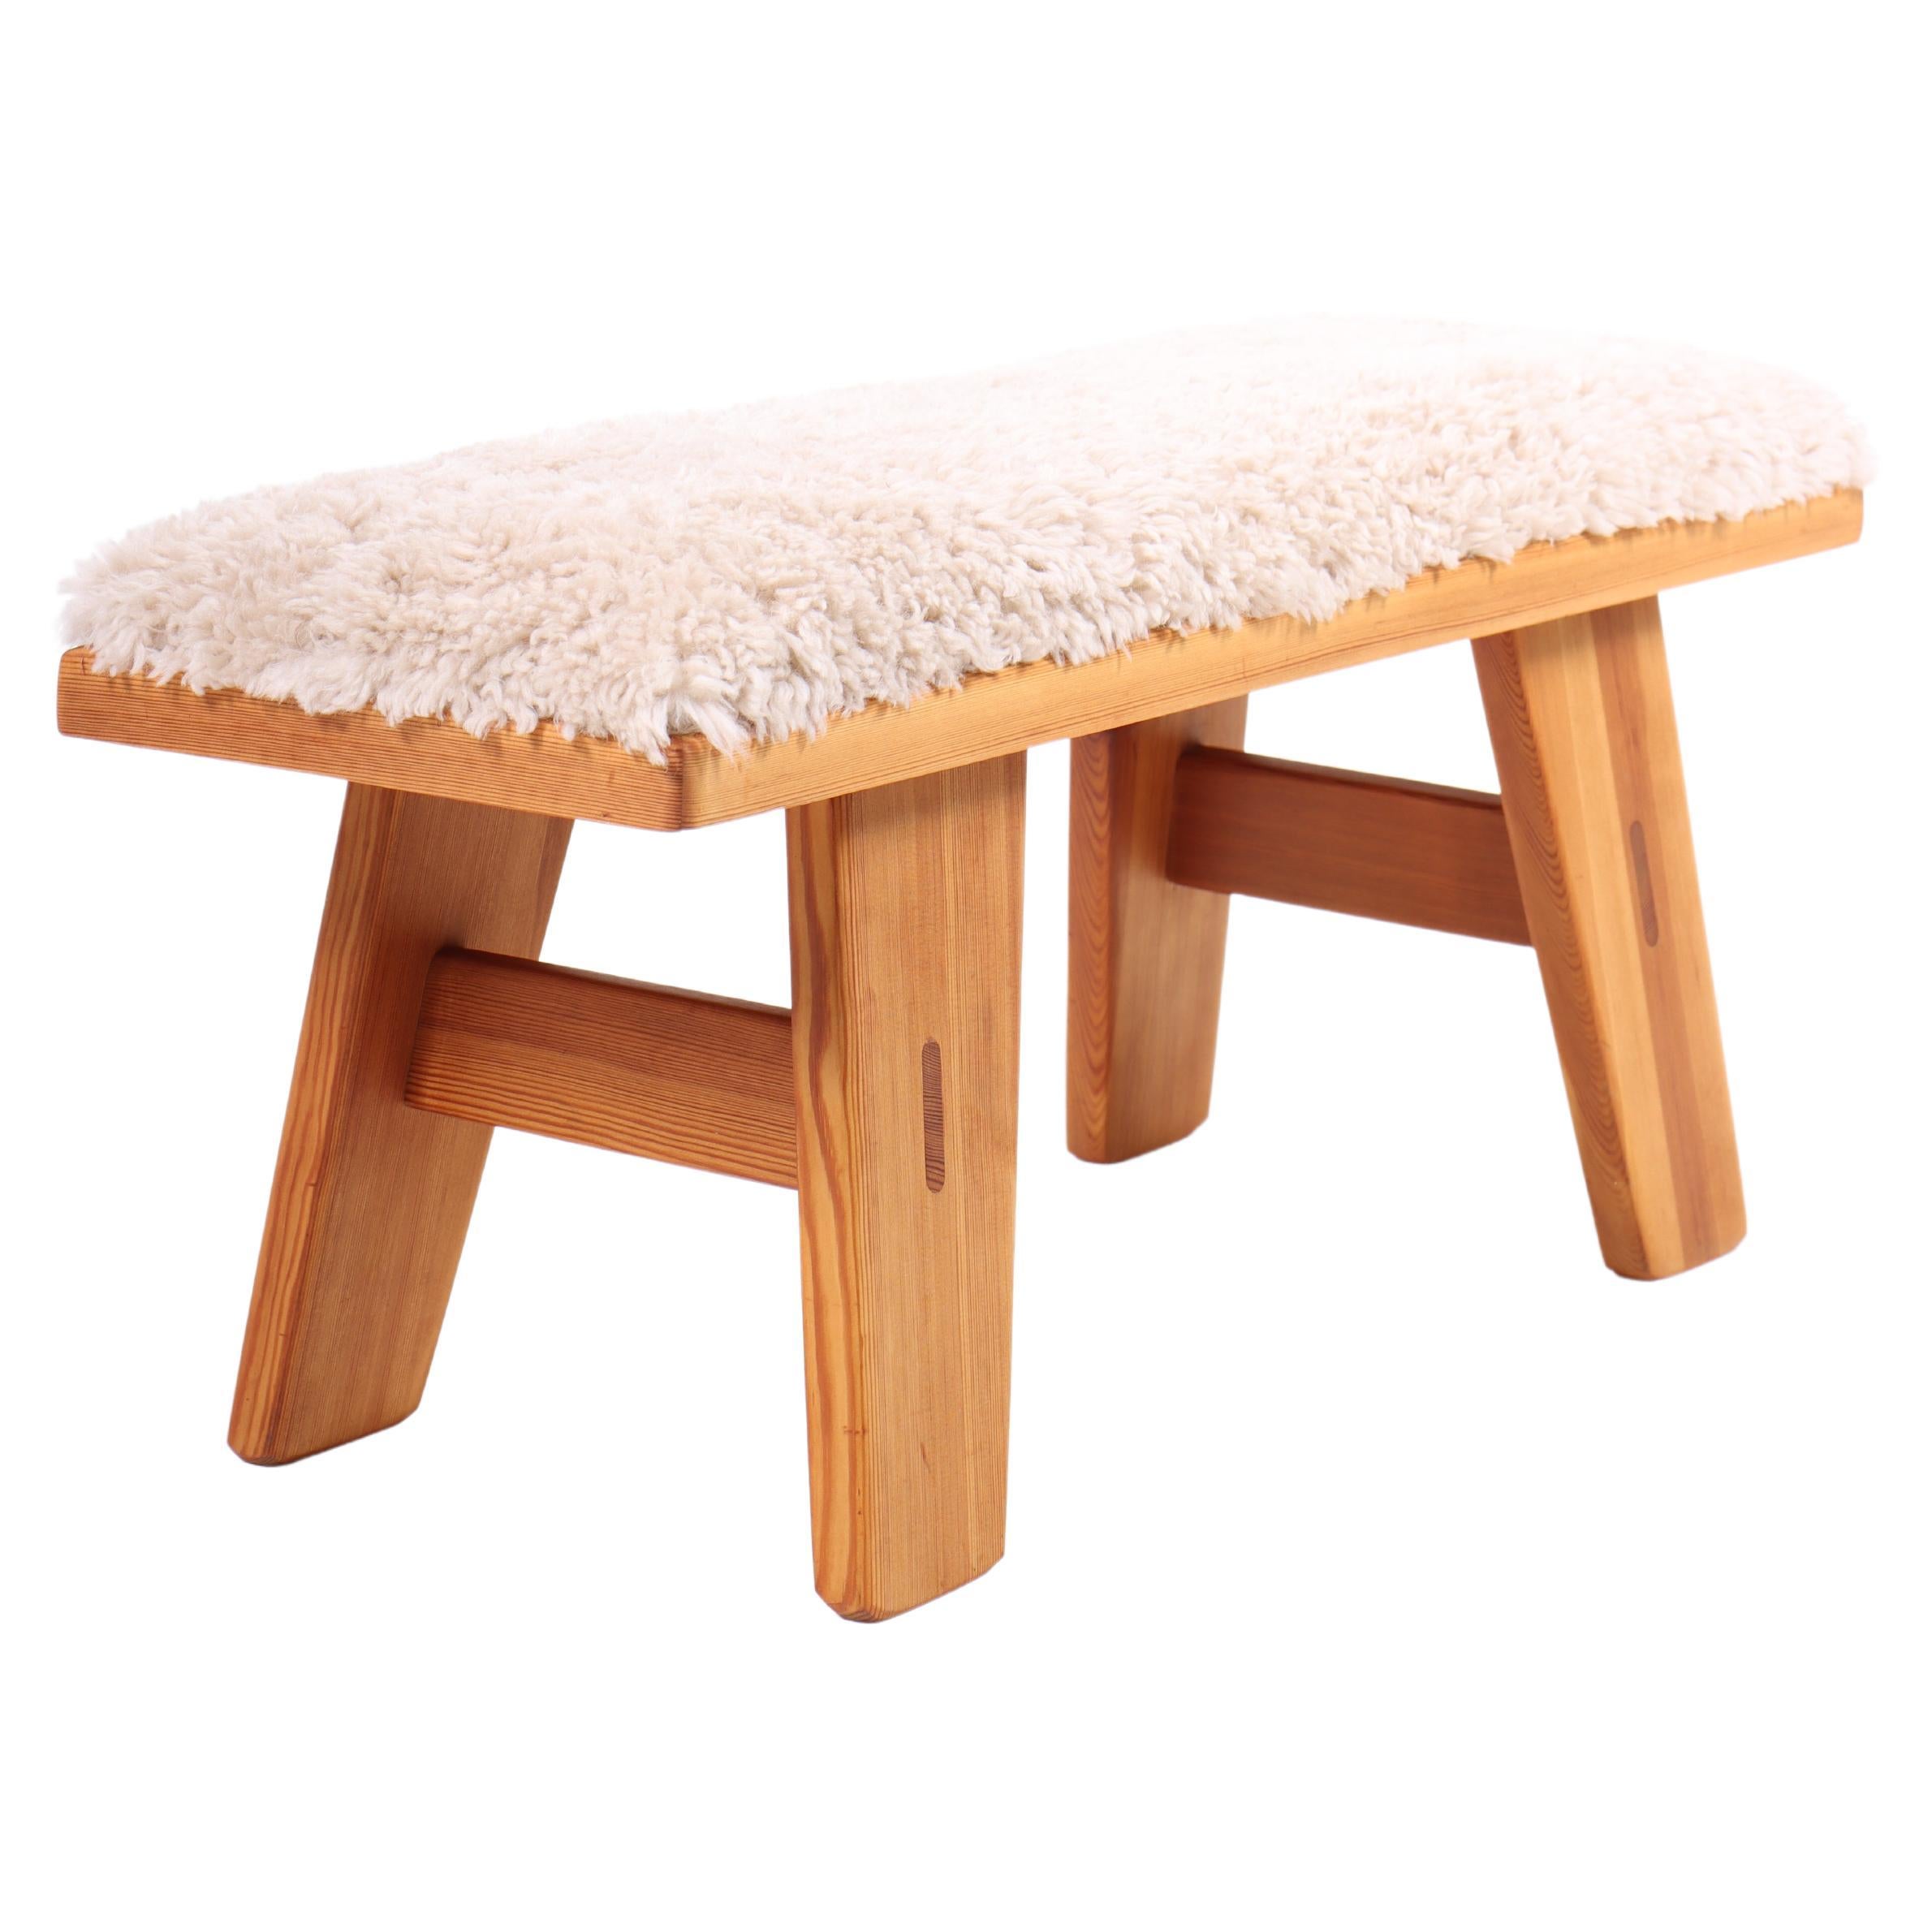 Midcentury Bench in Solid Pine and Sheepskin, 1960s